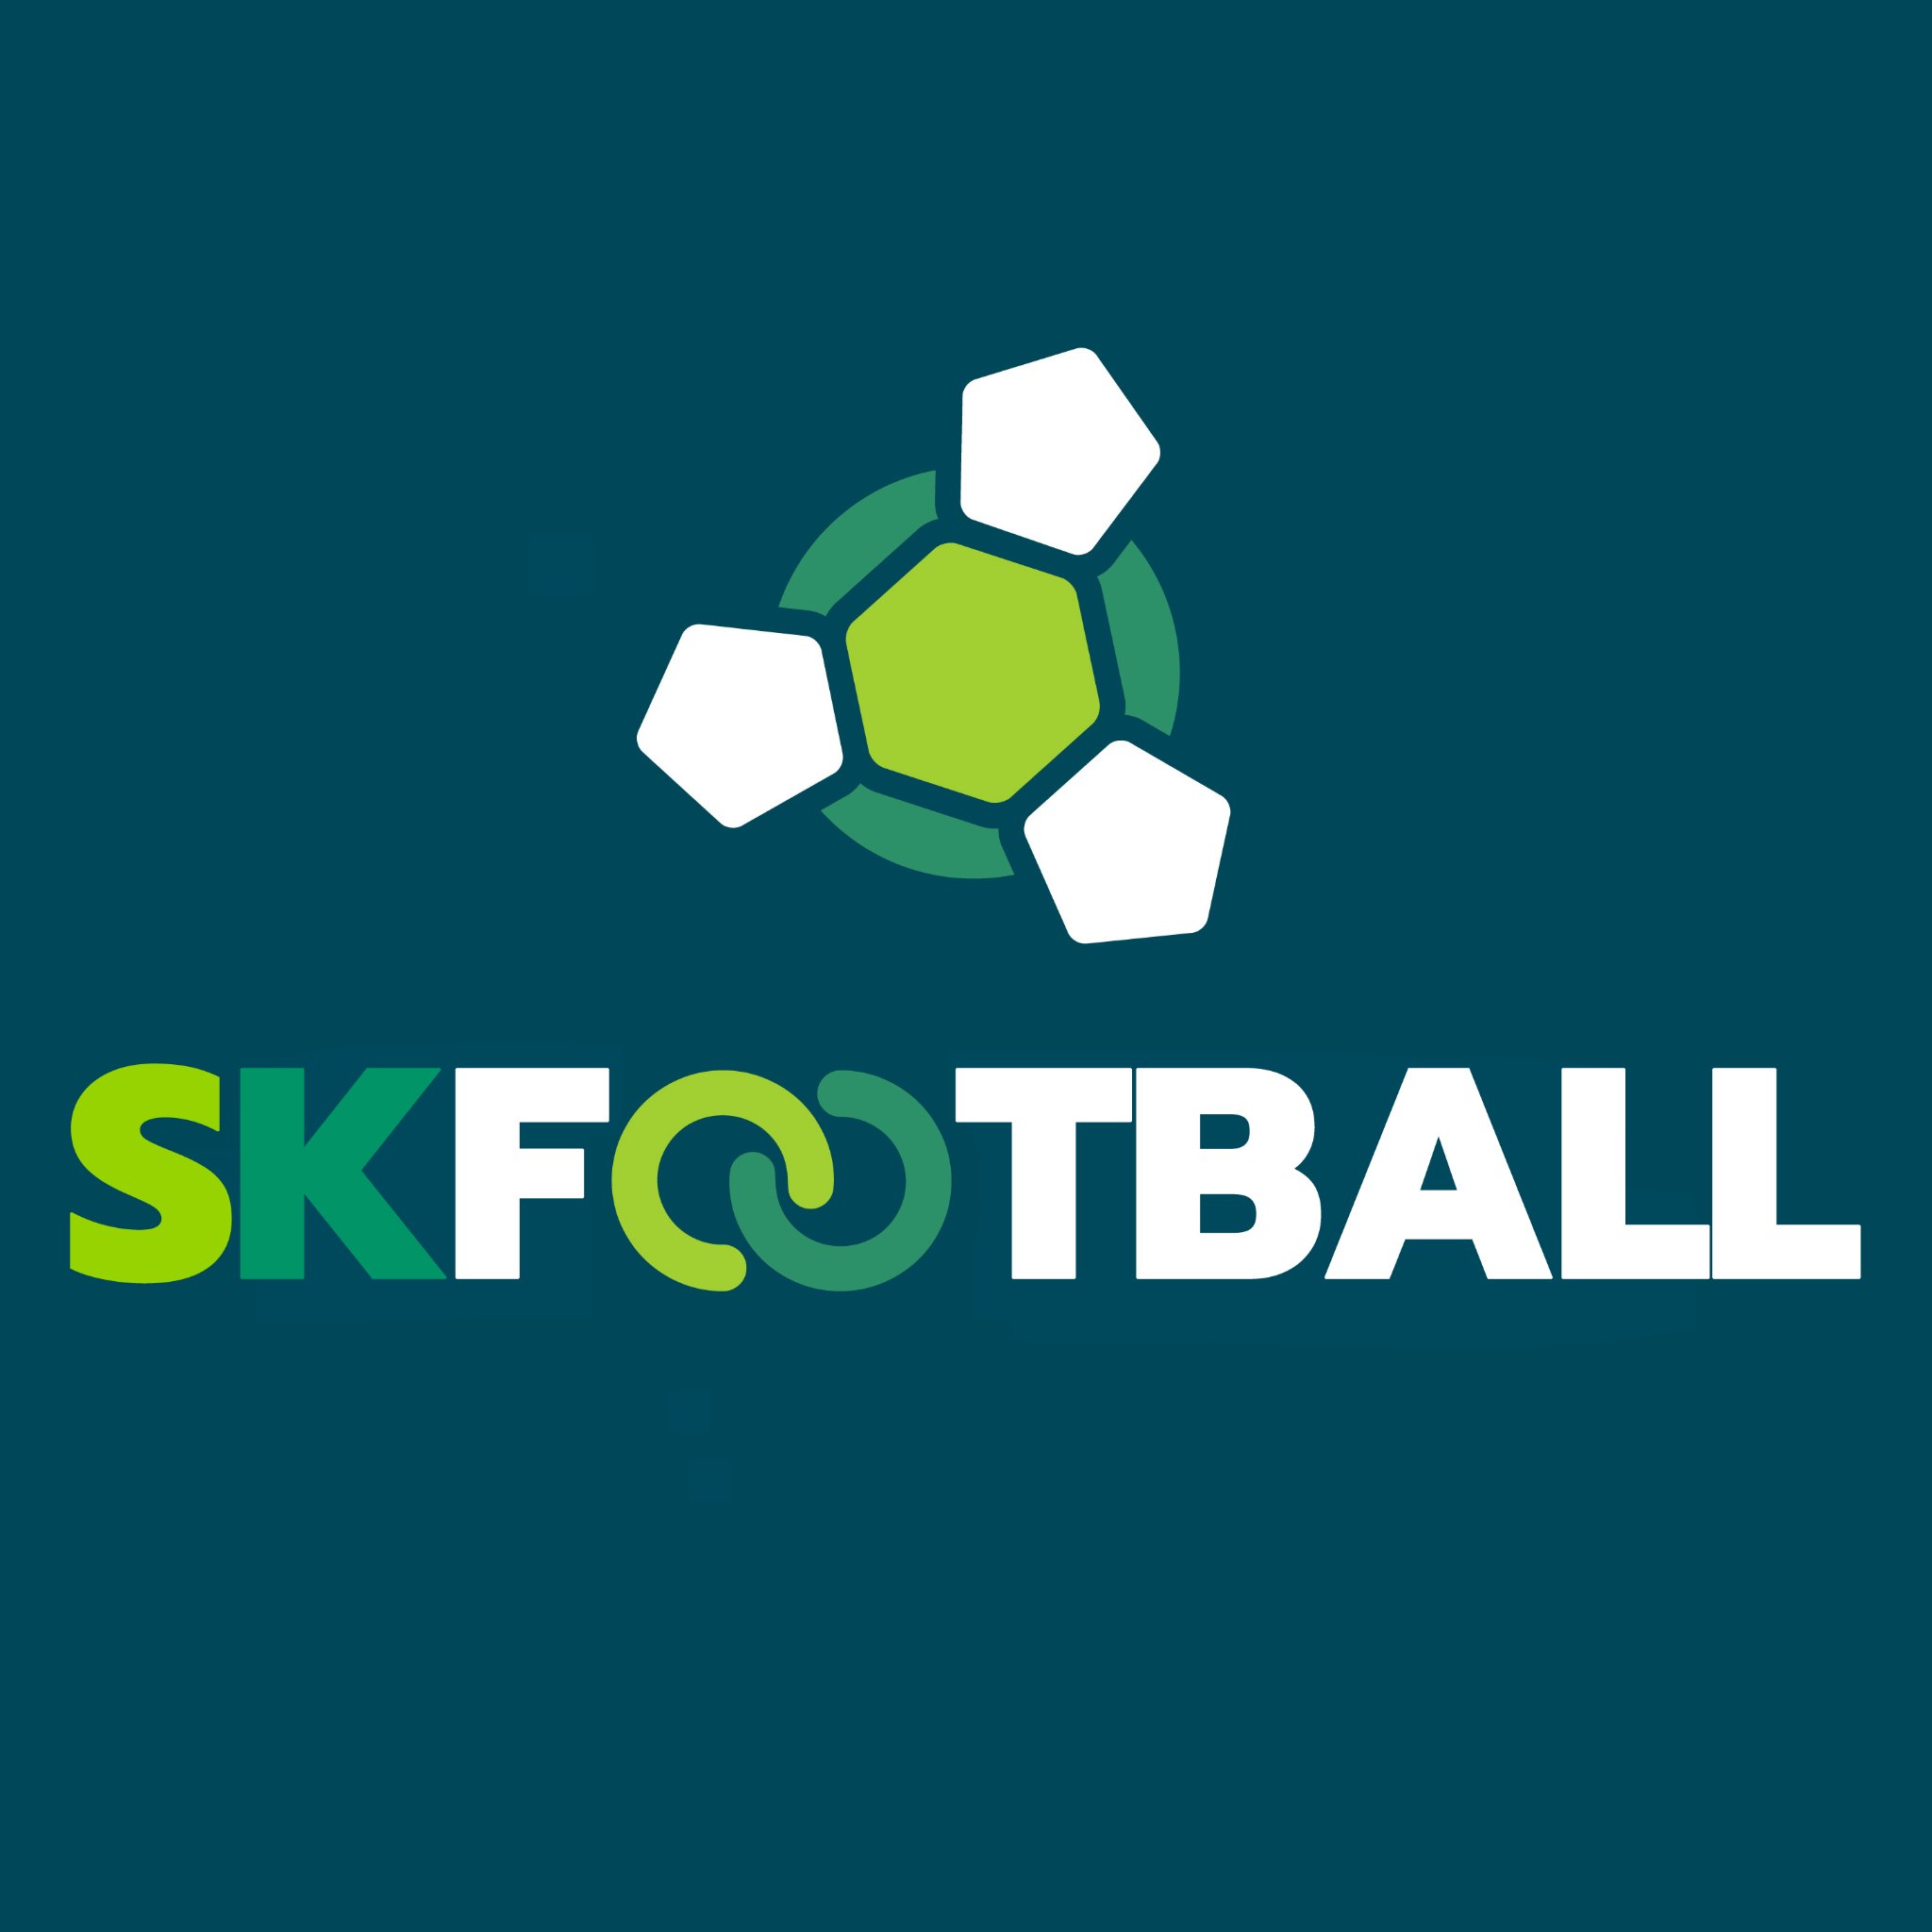 This is a brand new website focusing on the football clubs in the SK region of Cheshire.